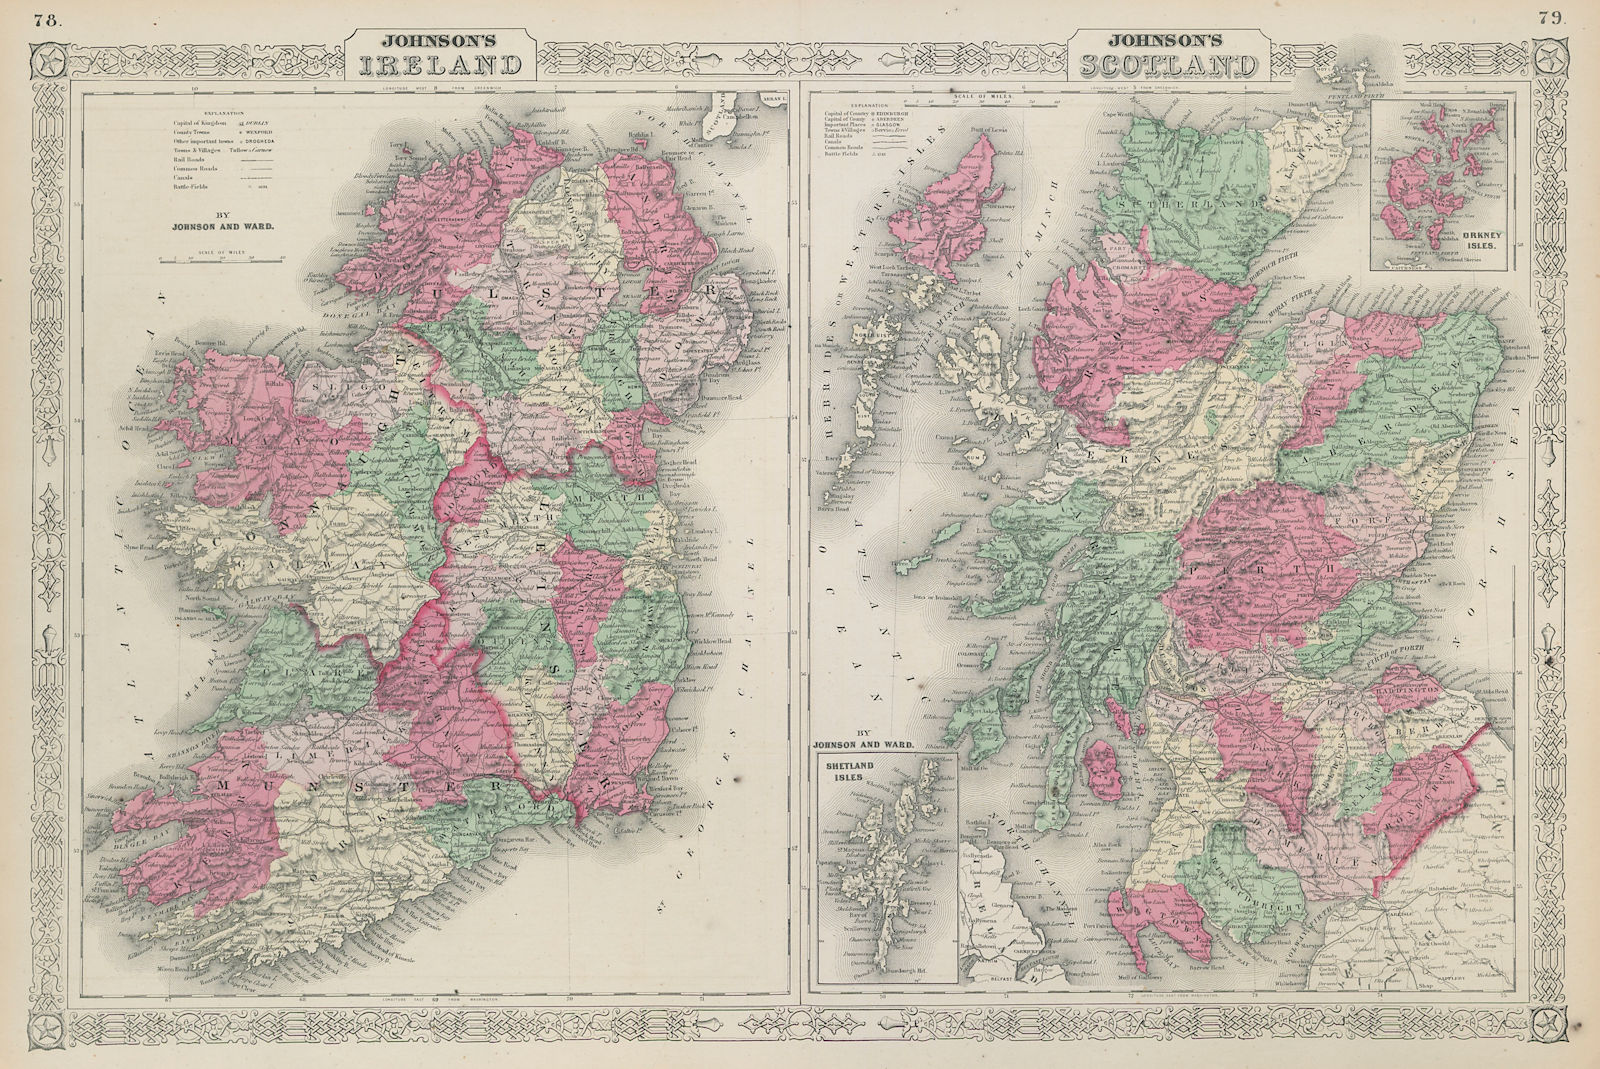 Johnson's Ireland & Johnson's Scotland showing counties 1865 old antique map